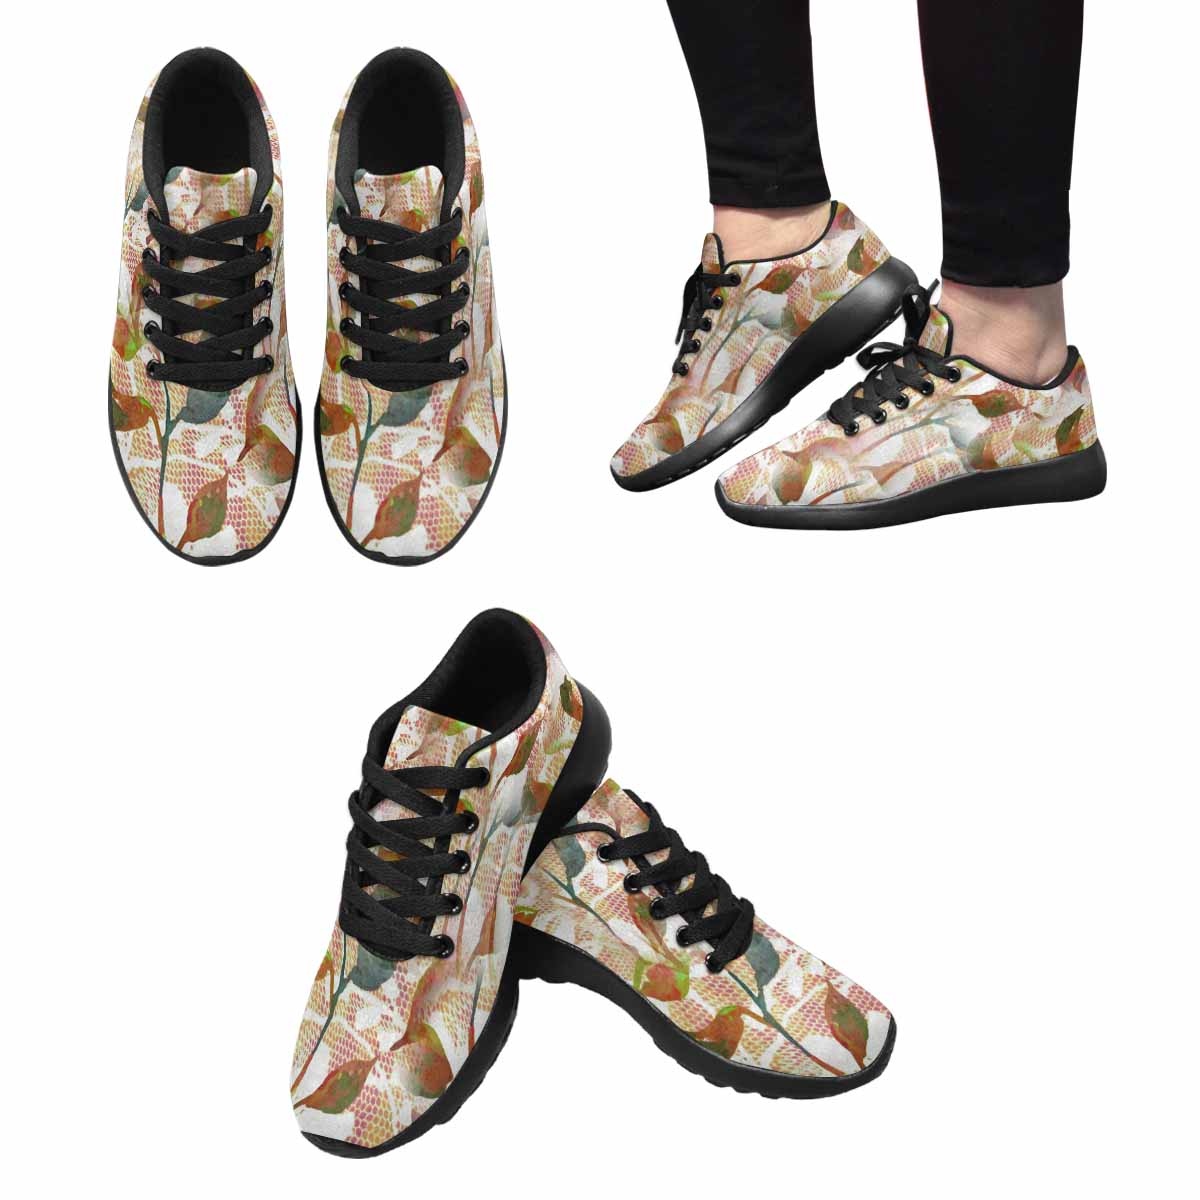 Victorian lace print, womens cute casual or running sneakers, design 52